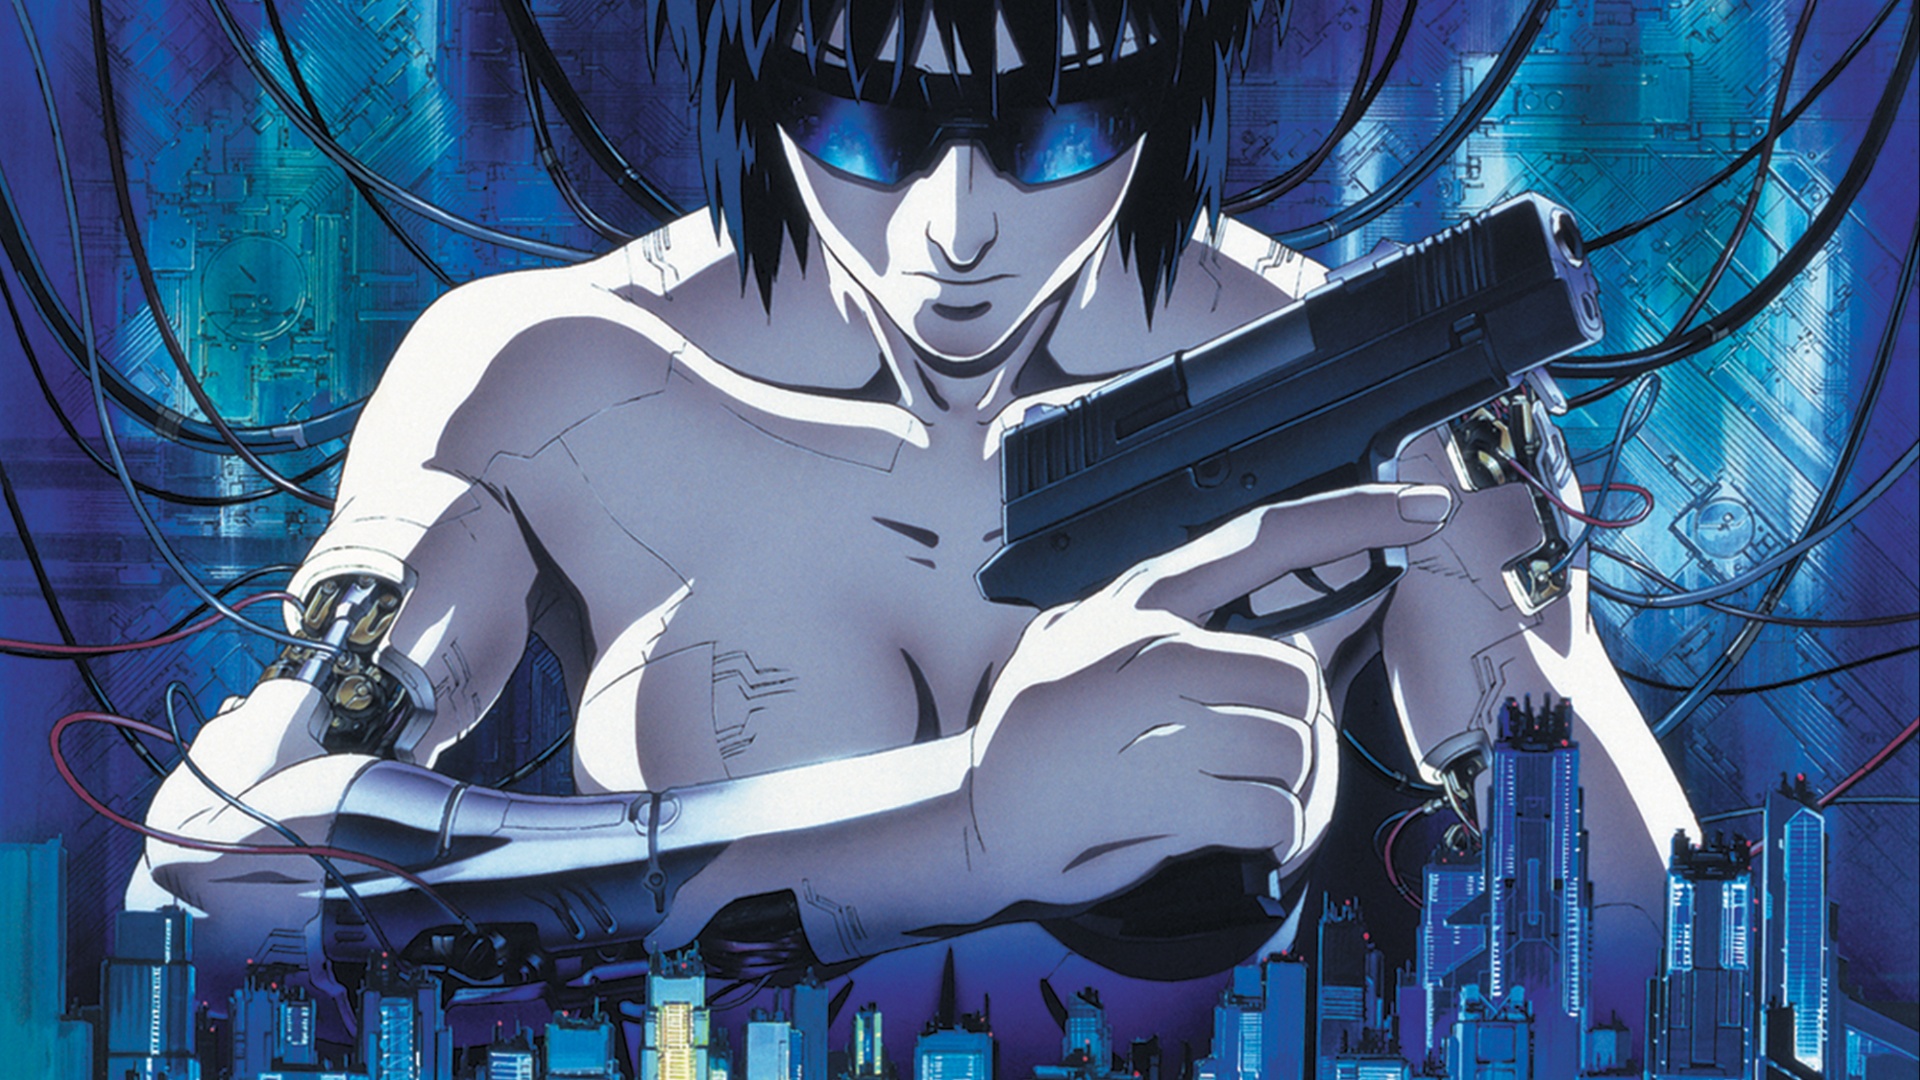 Ghost in the Shell (1995 Movie) Official IMAX Trailer - Mamoru Oshii,  Masamune Shirow - YouTube